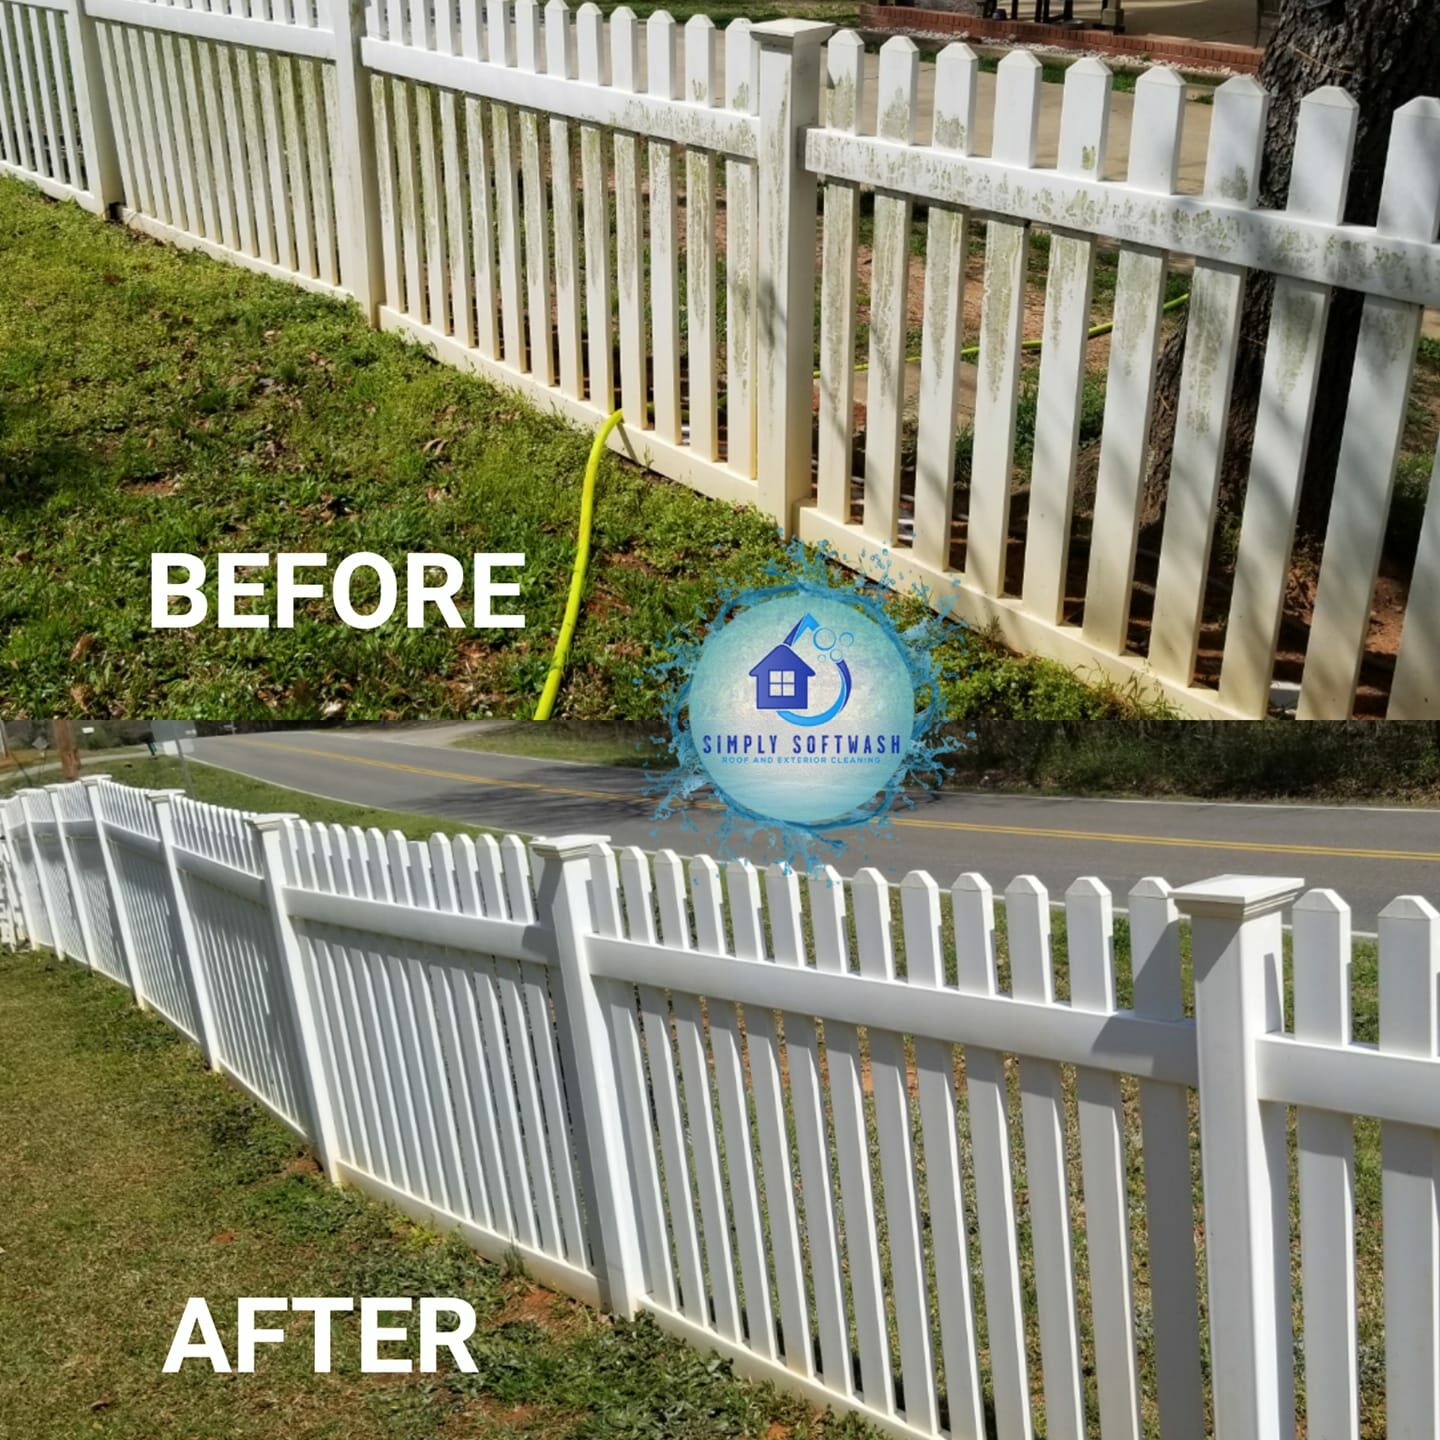 More and more homeowners are investing in residential fence cleaning for all kinds of reasons. No matter what time of the year, fence cleaning removes stains, oils, grime, dirt, mold, spider webs, and bug nests from fences, improving curb appeal and aesthetics. But not all residential fence cleaning methods provide the same results. The right pressure washing techniques are the safest, most affordable way to clean fences in Lancaster.